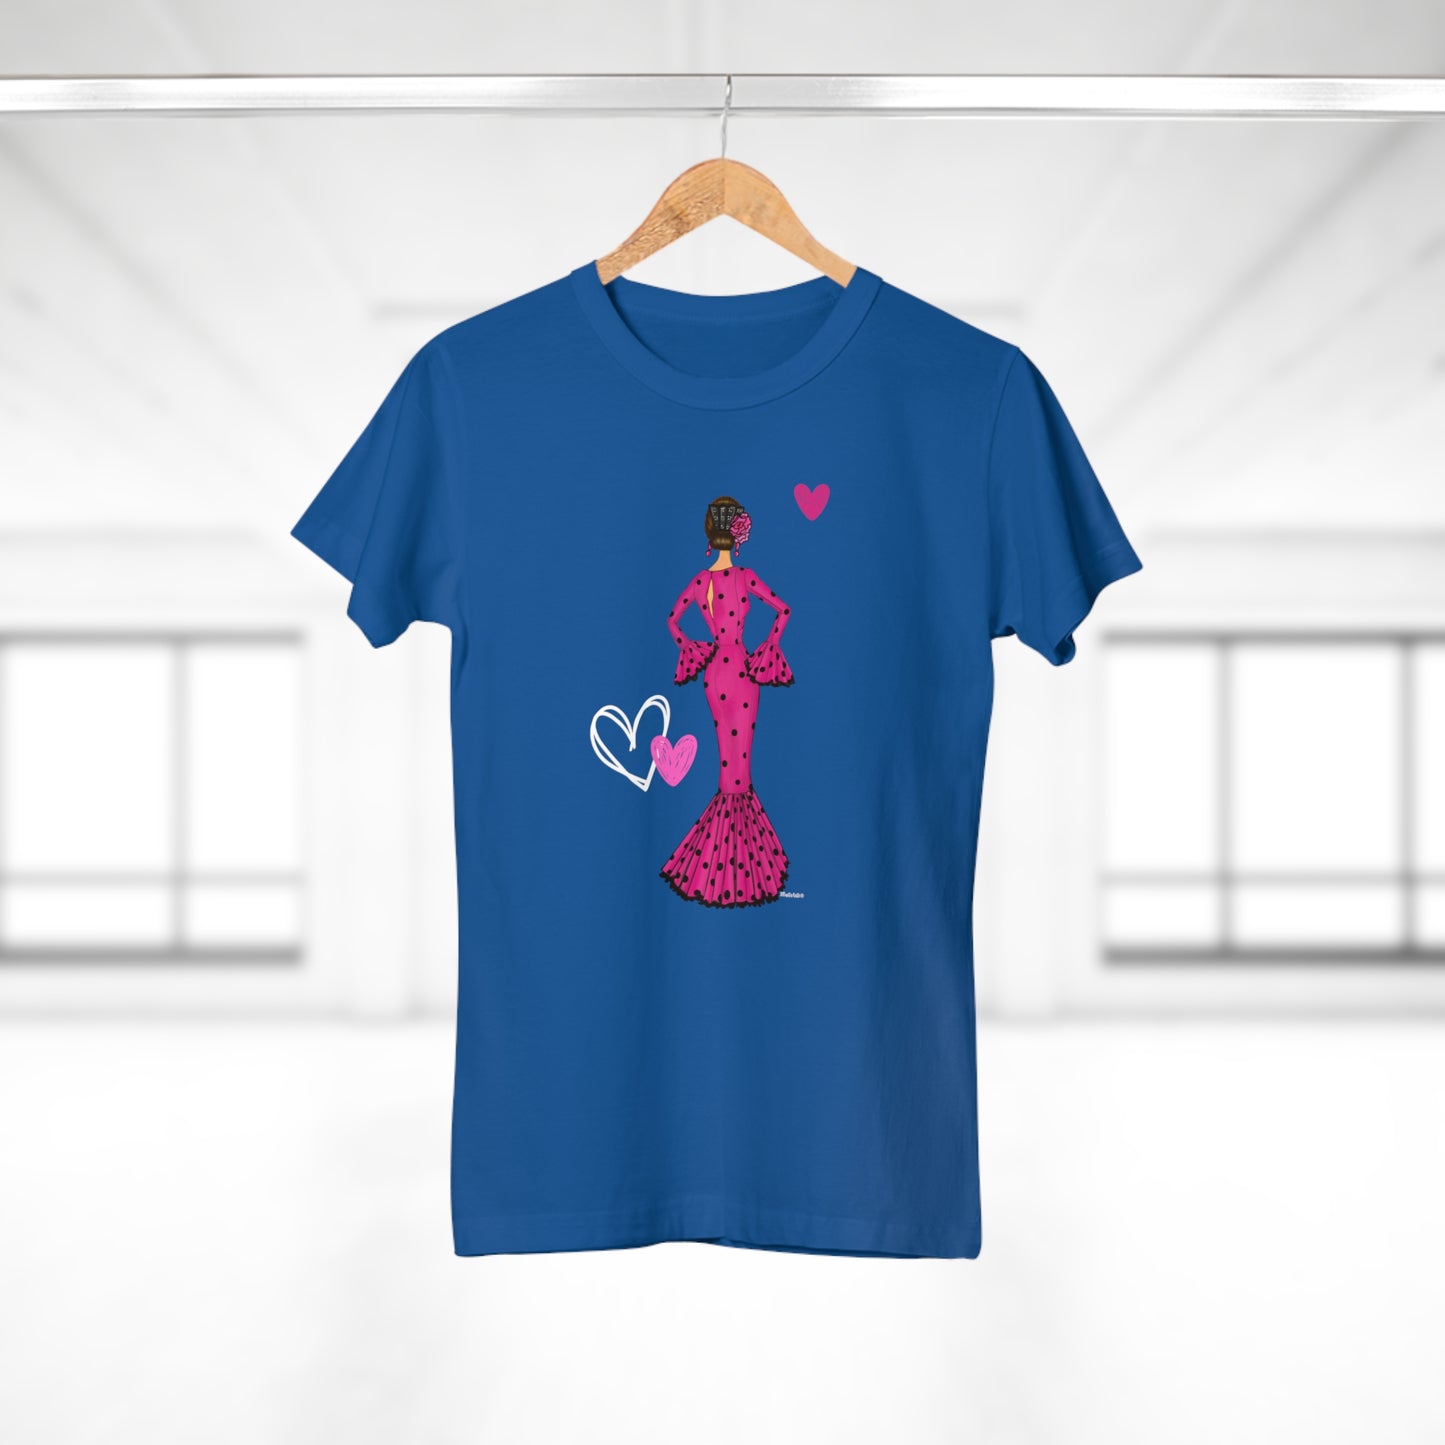 a blue t - shirt with a woman in a pink dress holding a heart